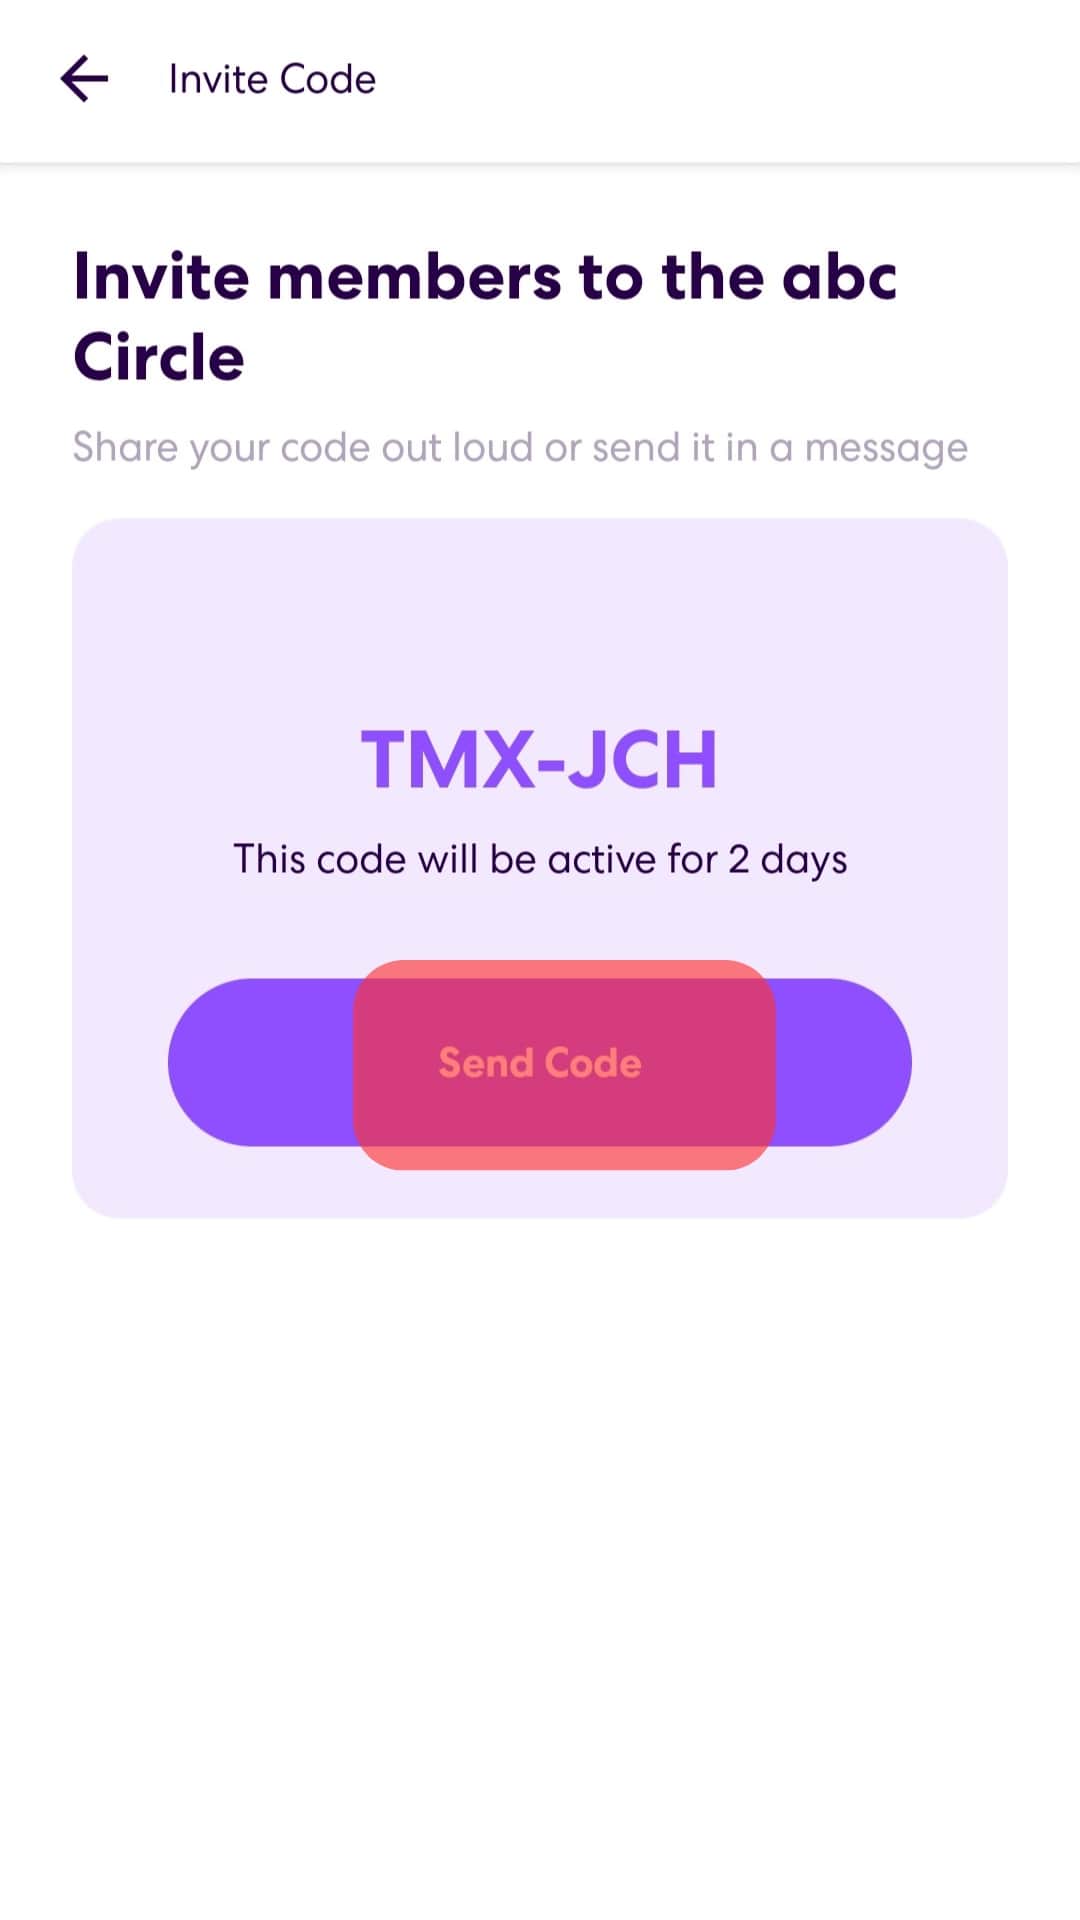 Send The Code To Your Mates